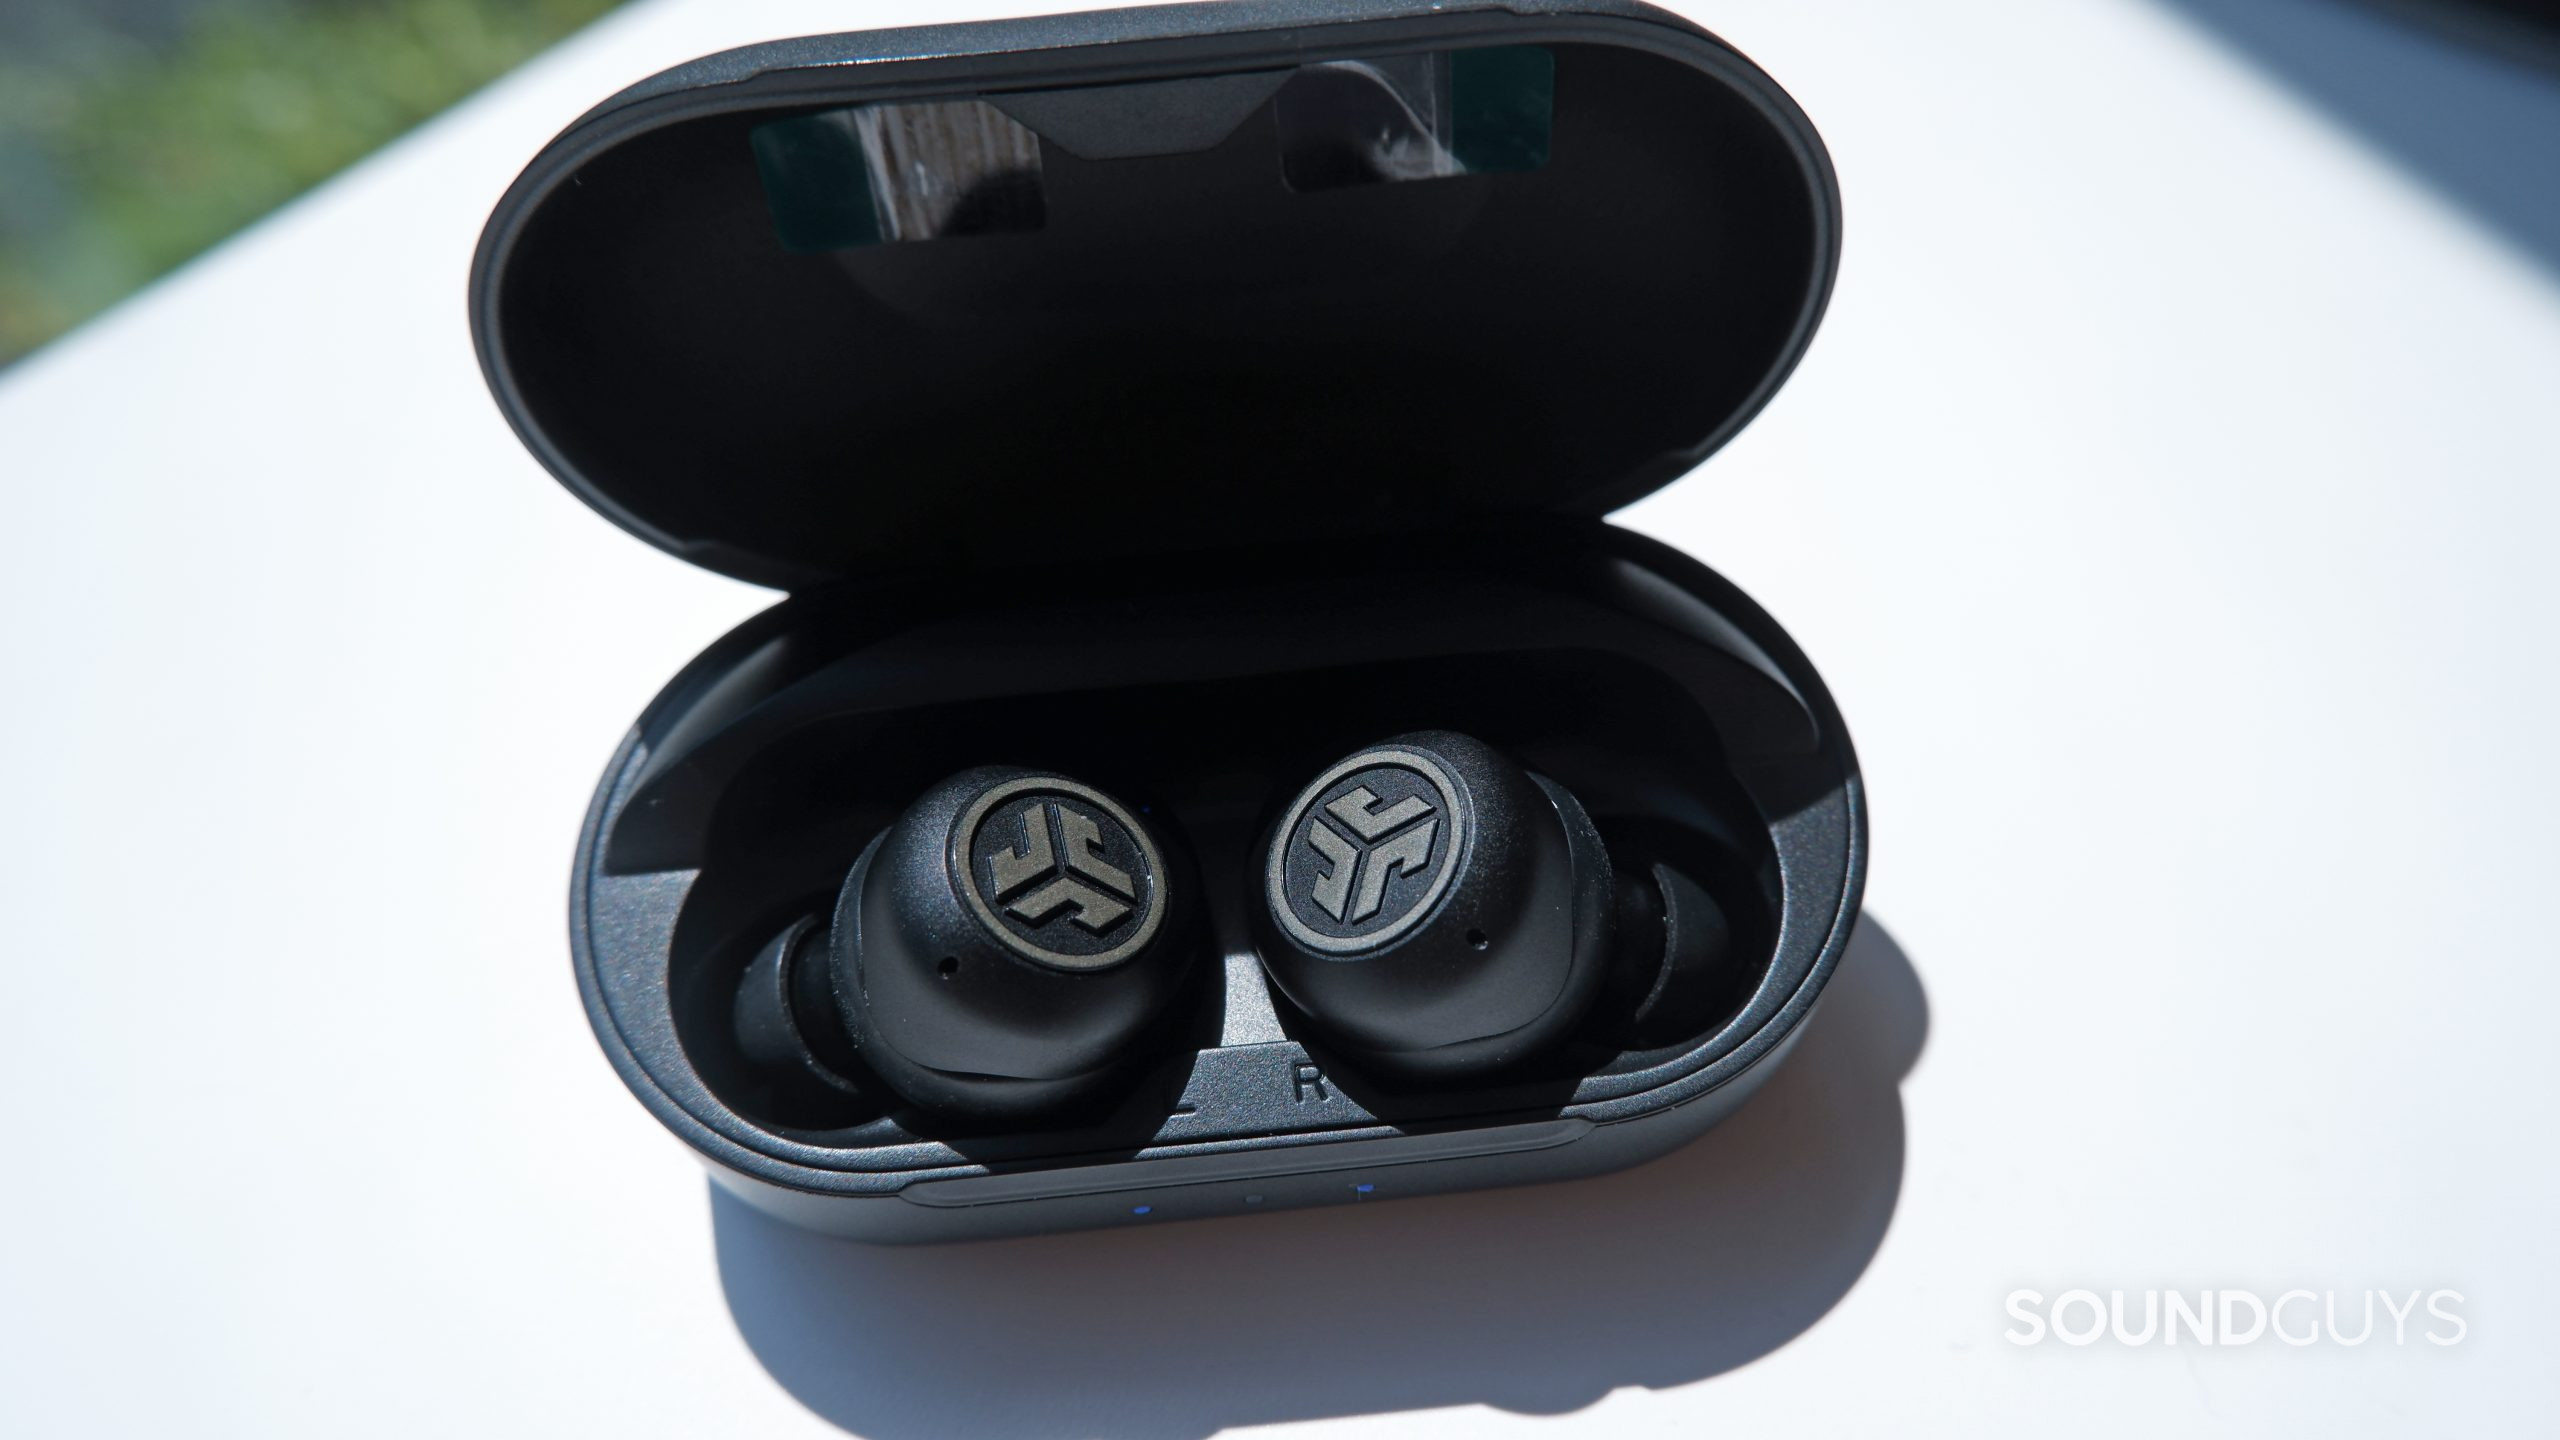 The JLab JBuds Air Pro inside the open case.